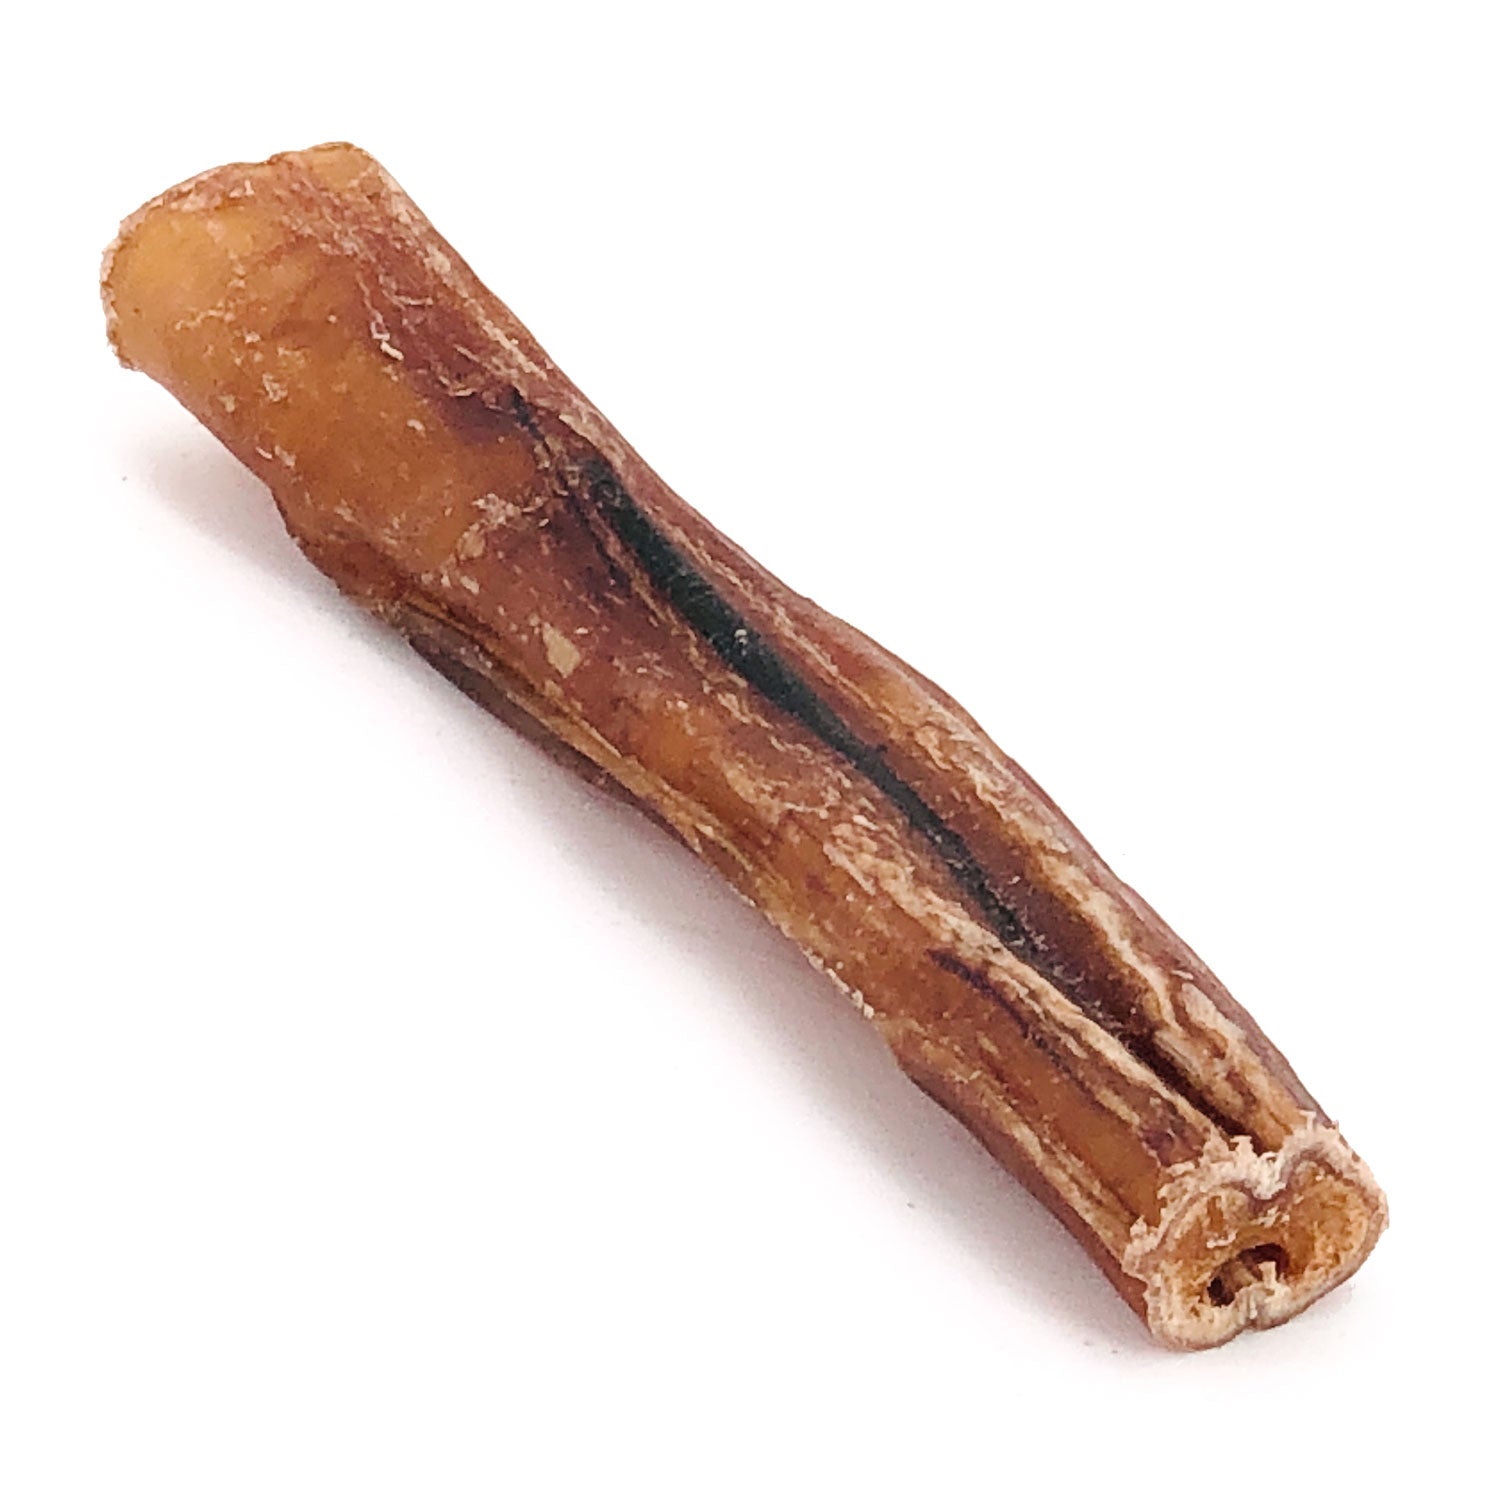 ValueBull Bully Sticks for Dogs, Thick 4-6", Varied Shapes, 25 ct